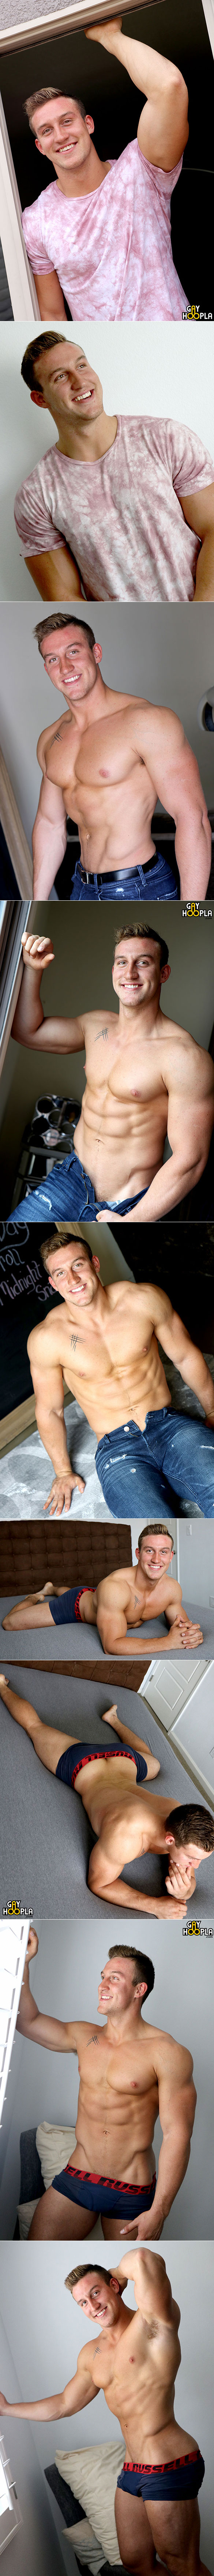 GayHoopla: Hot new muscle stud Max Warner shows off and jerks off